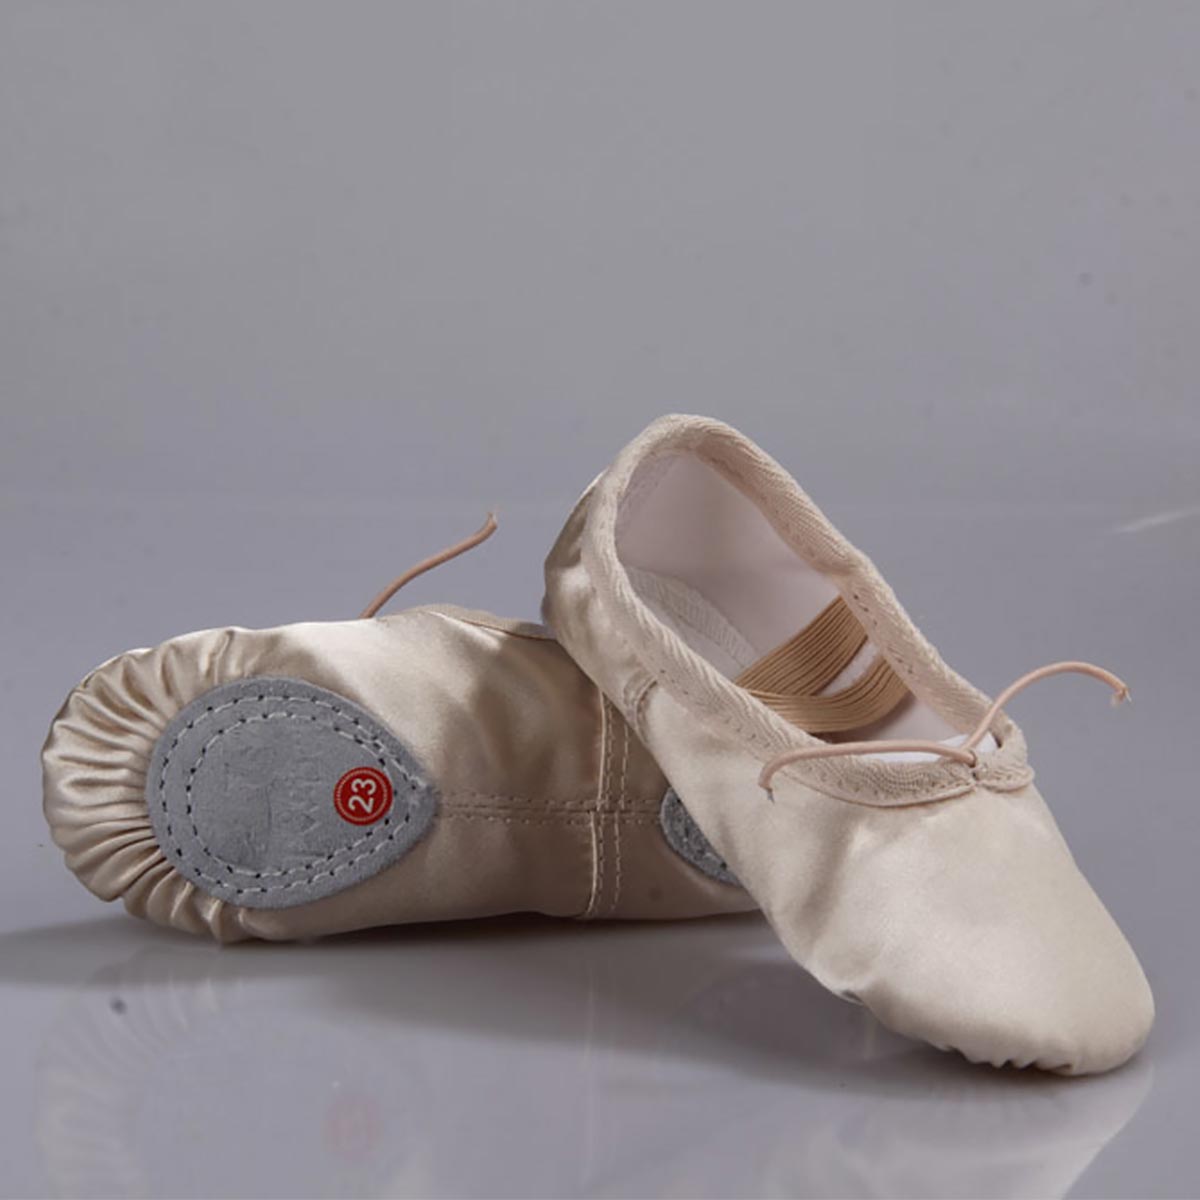 HAWEE Ballet Shoes, Satin Ballet Slippers Flats Professional Performa Dance Shoe for Girls Ballet Yoga Practice Dance Shoes - image 5 of 6